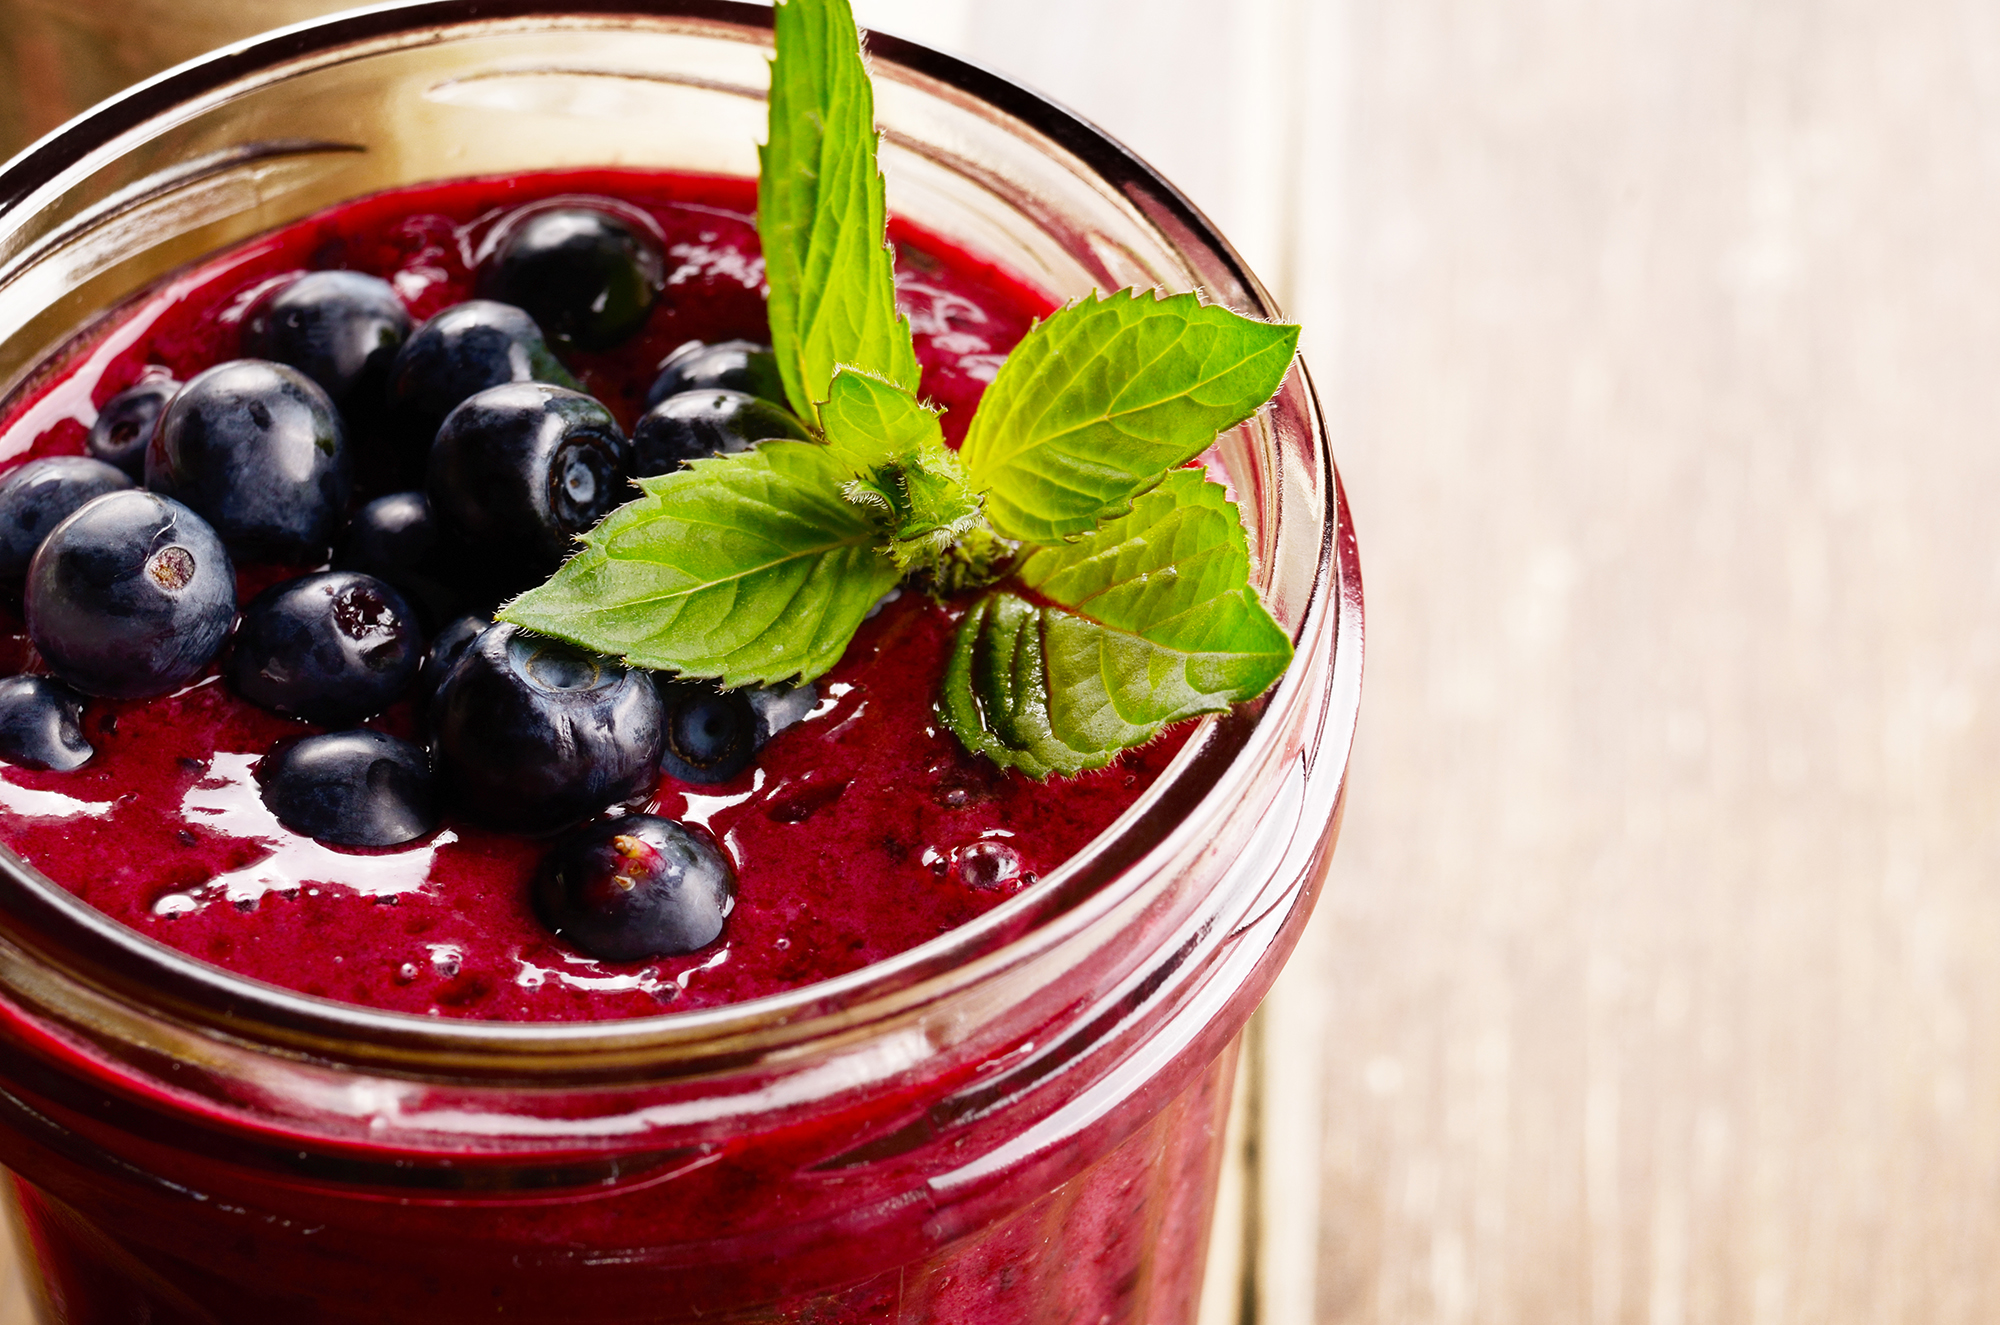 Blueberry healthy smoothie